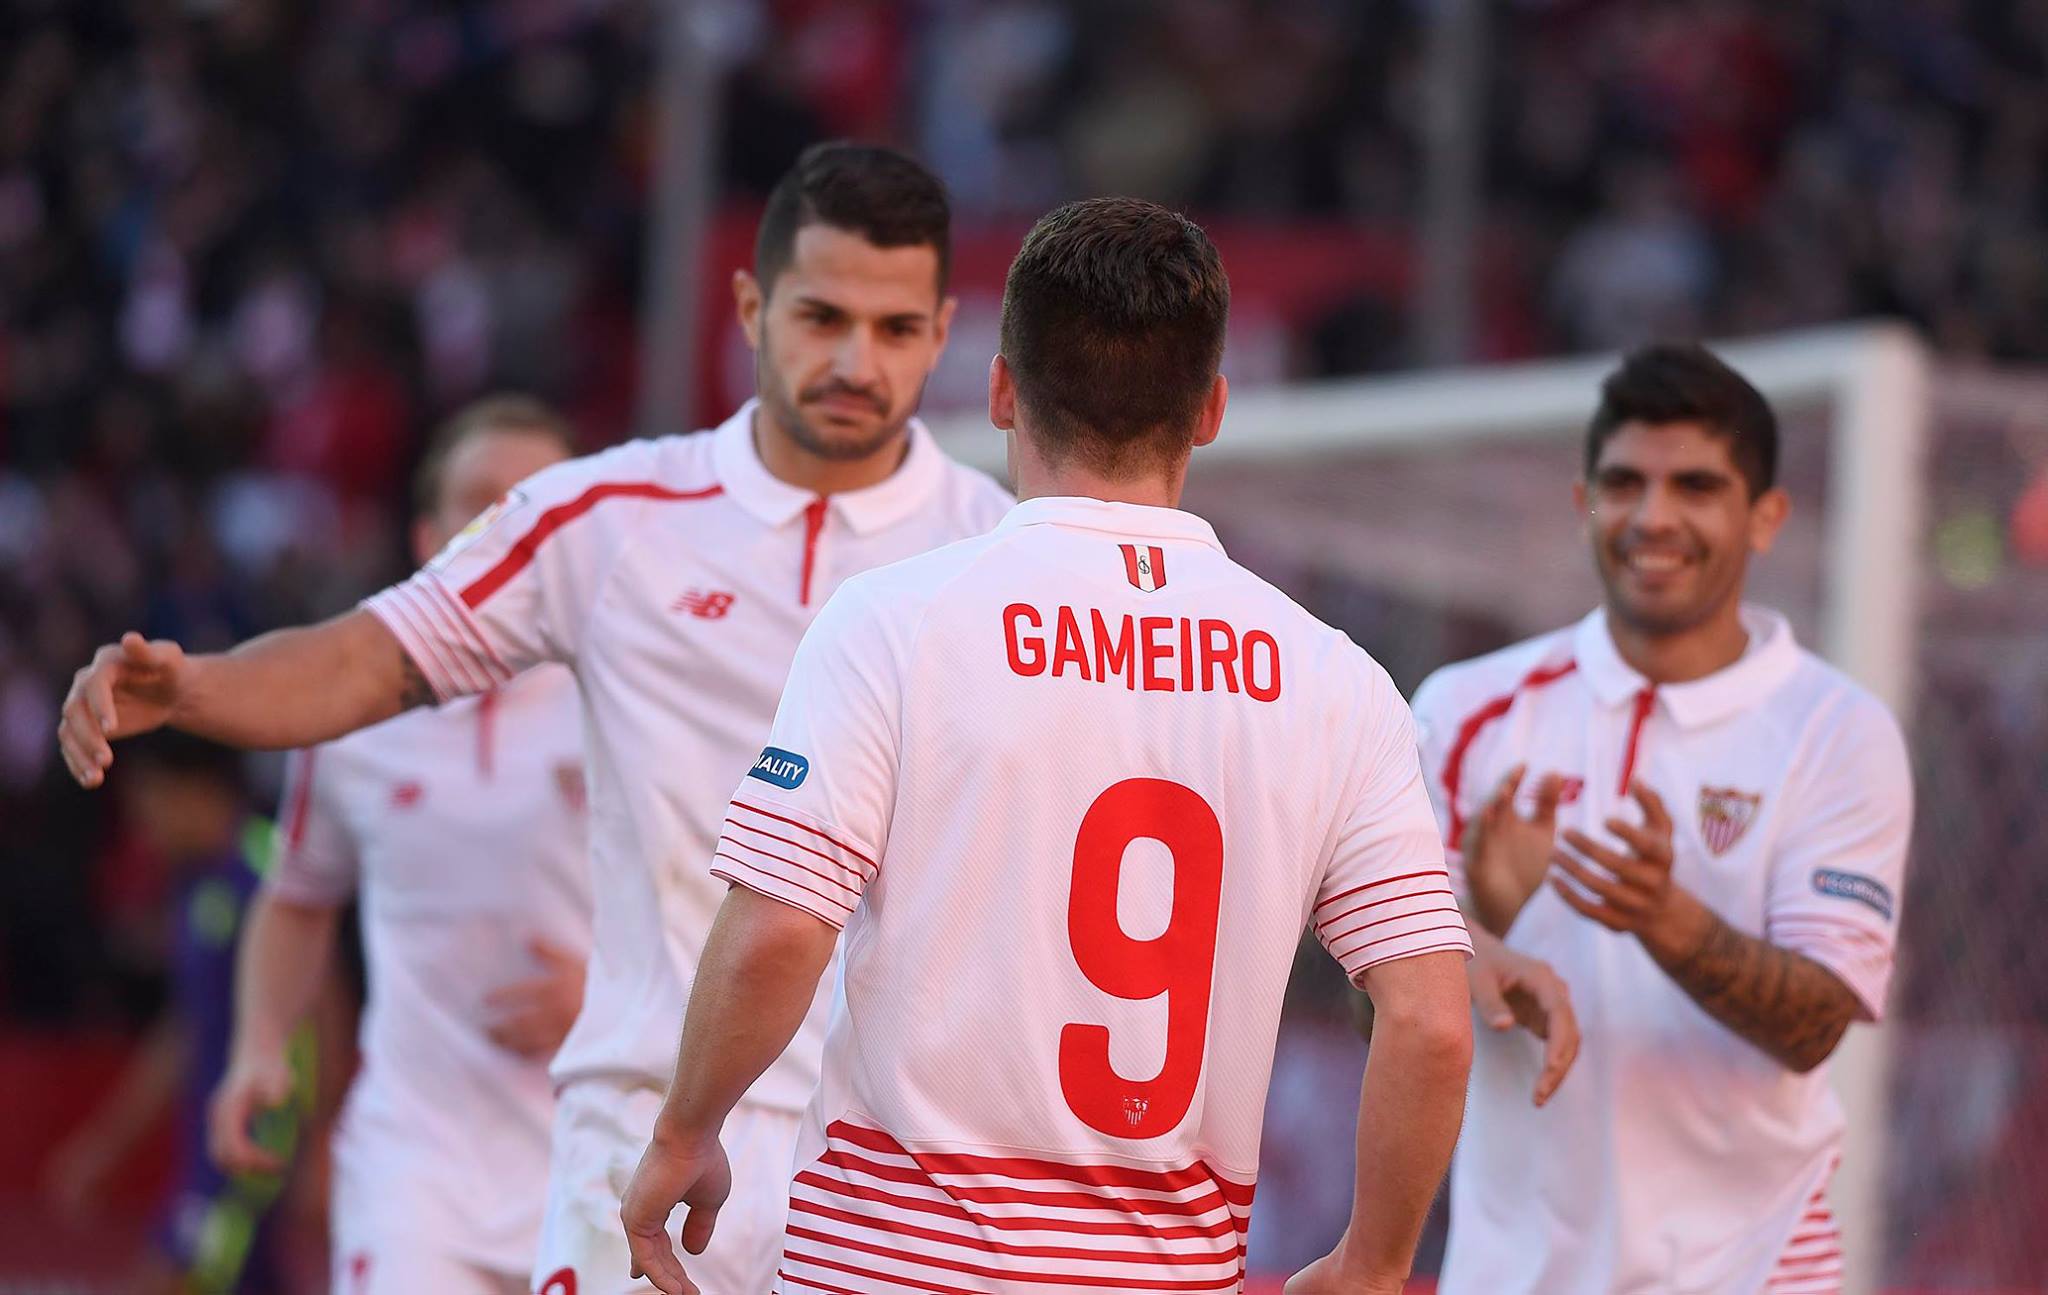 Will Sevilla be able to return to winning ways at home next Sunday?